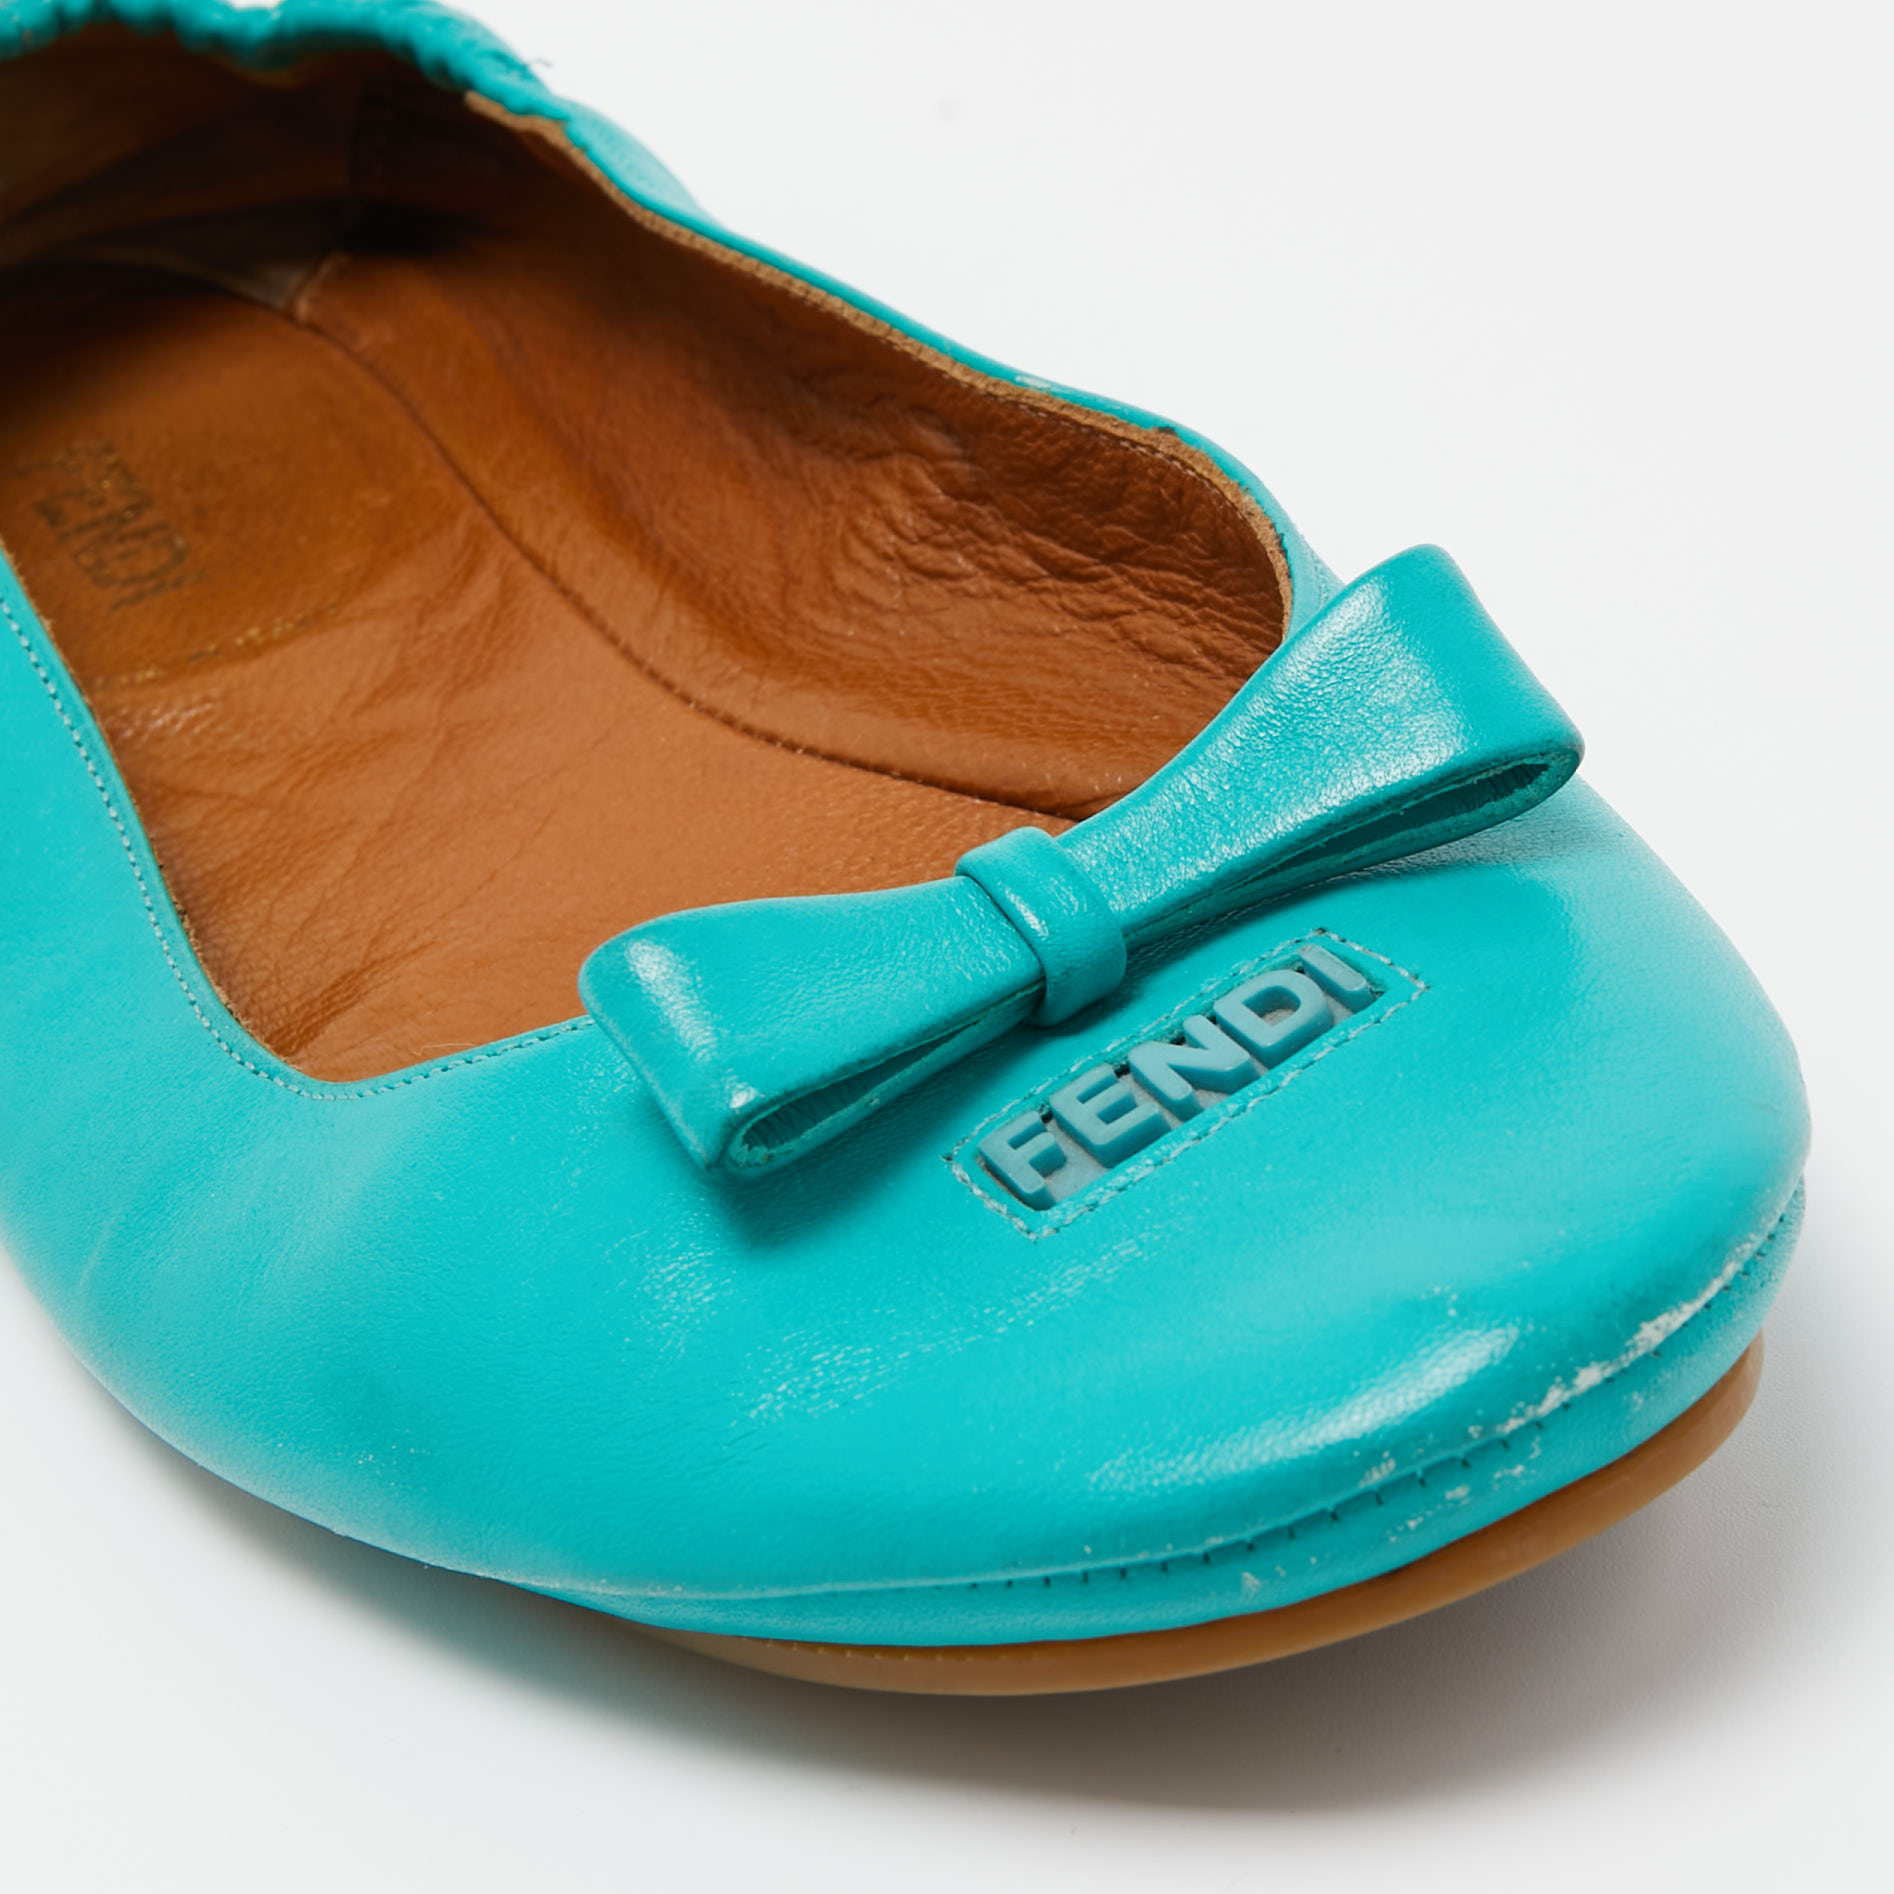 Fendi Turquoise Leather Bow Scrunch Ballet Flats Size 39